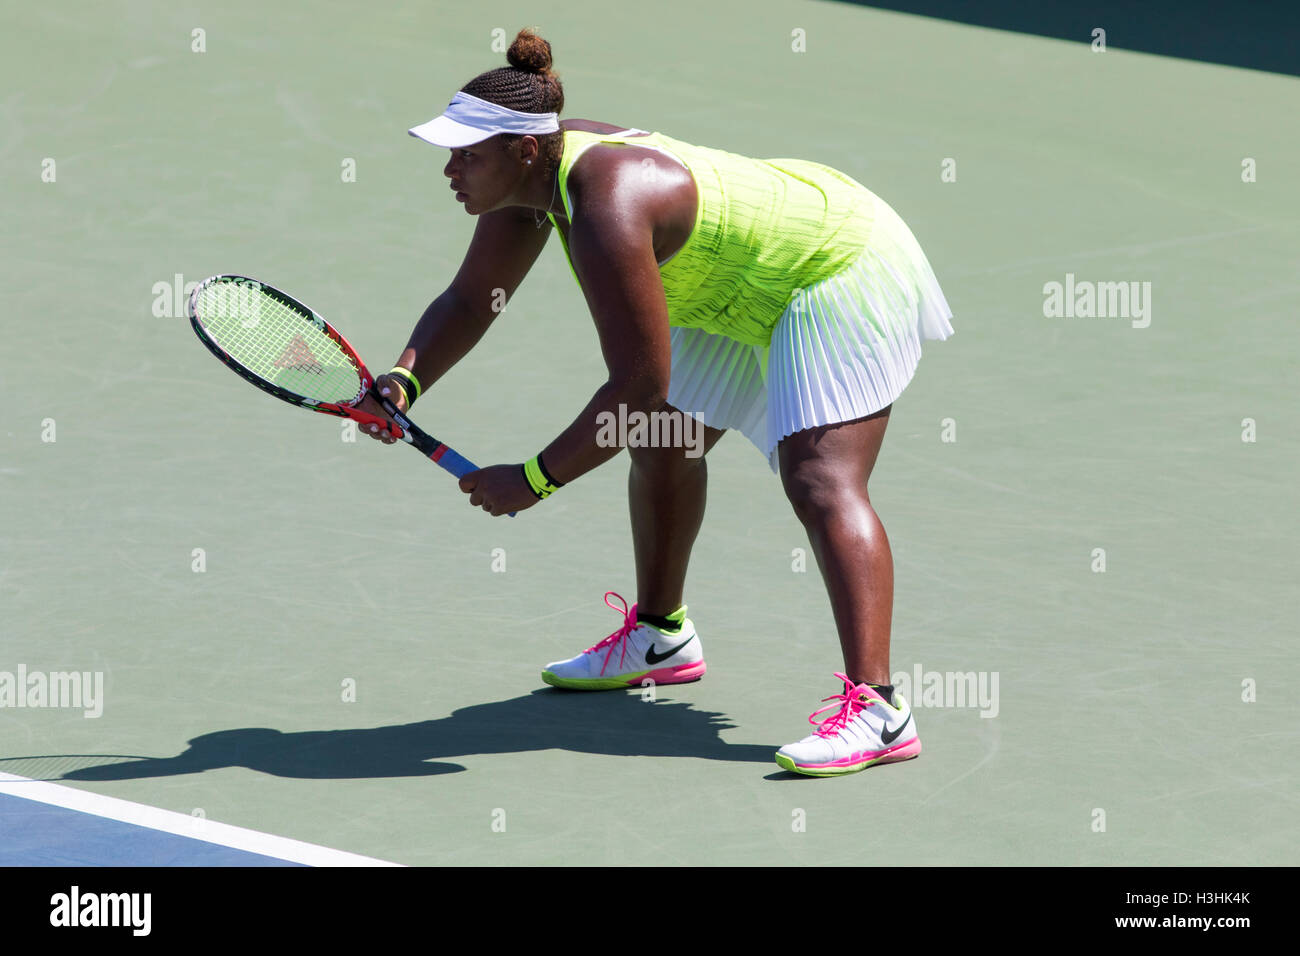 Taylor Townsend (USA) competere nel 2016 US Open Foto Stock